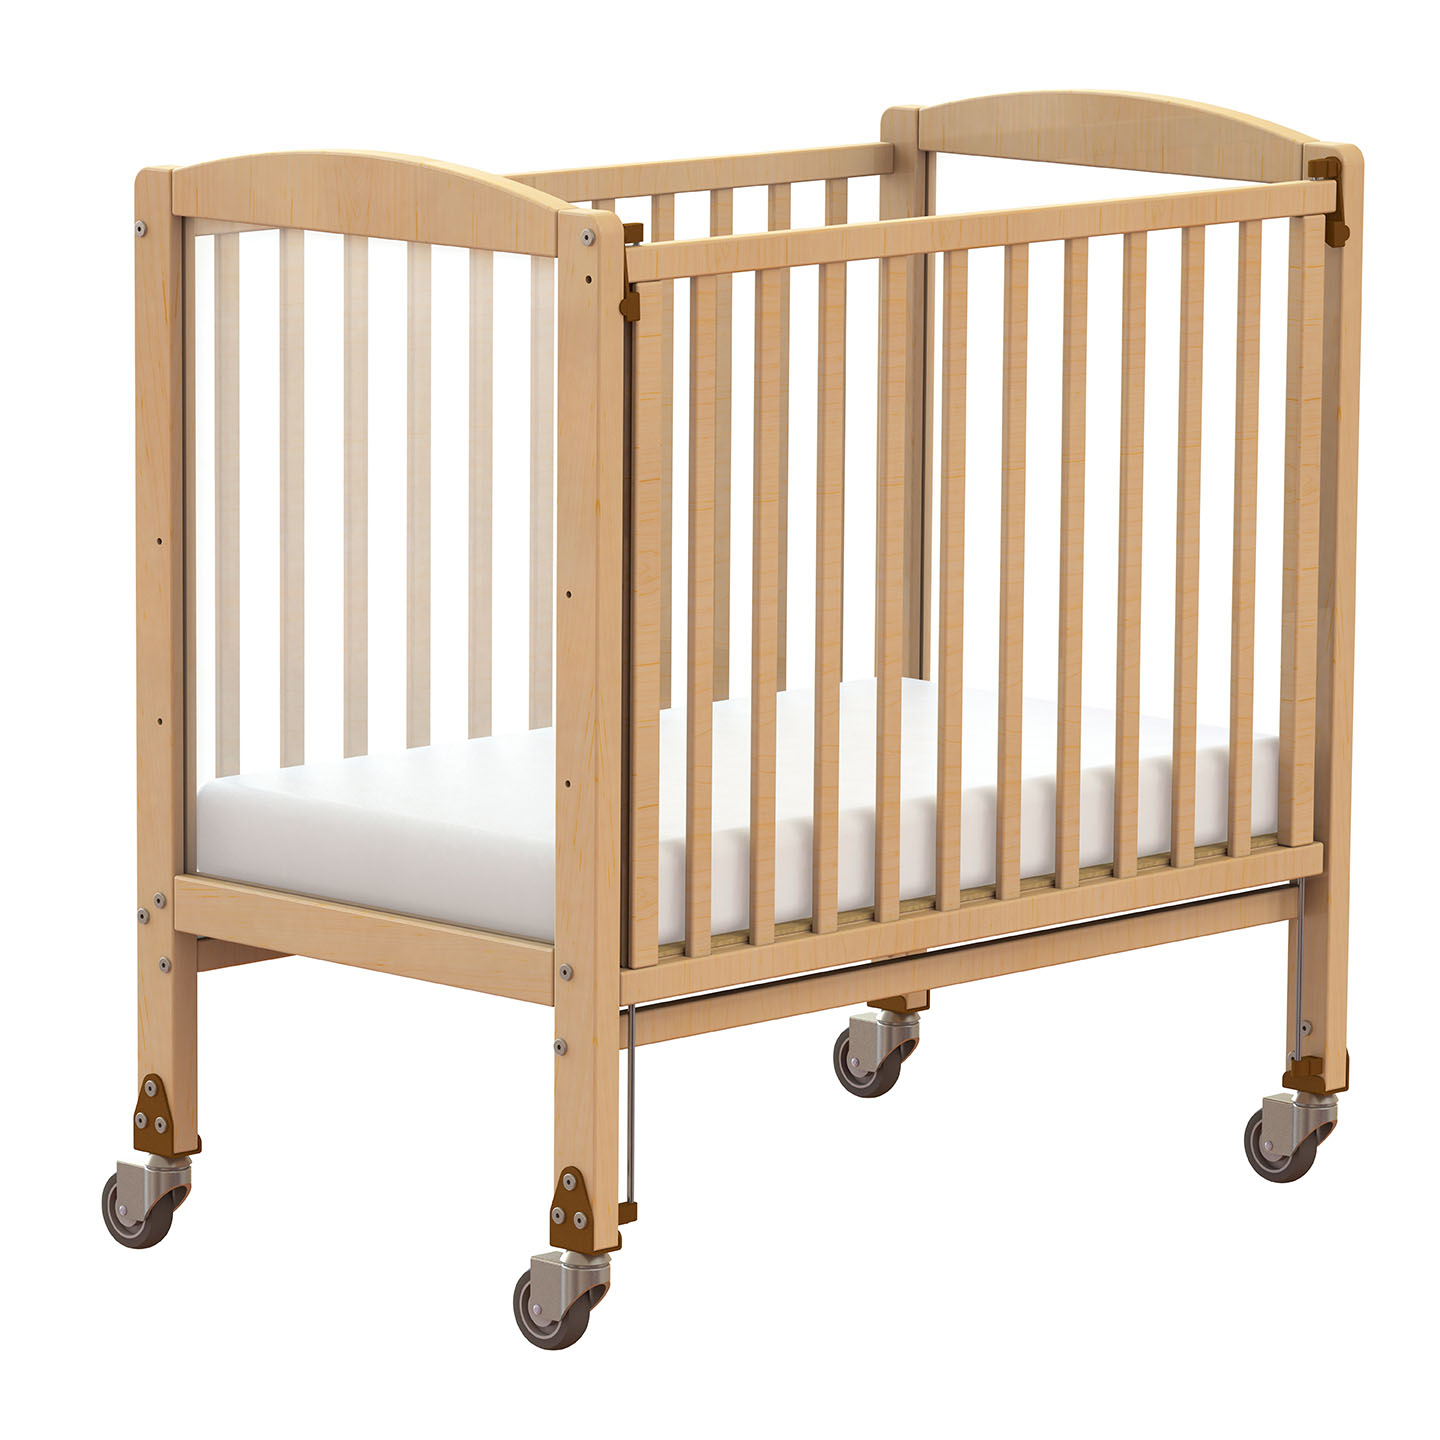 PT491-Millhouse-Early-Years-Furniture-Dropside-Cot_Main_RGB.jpg